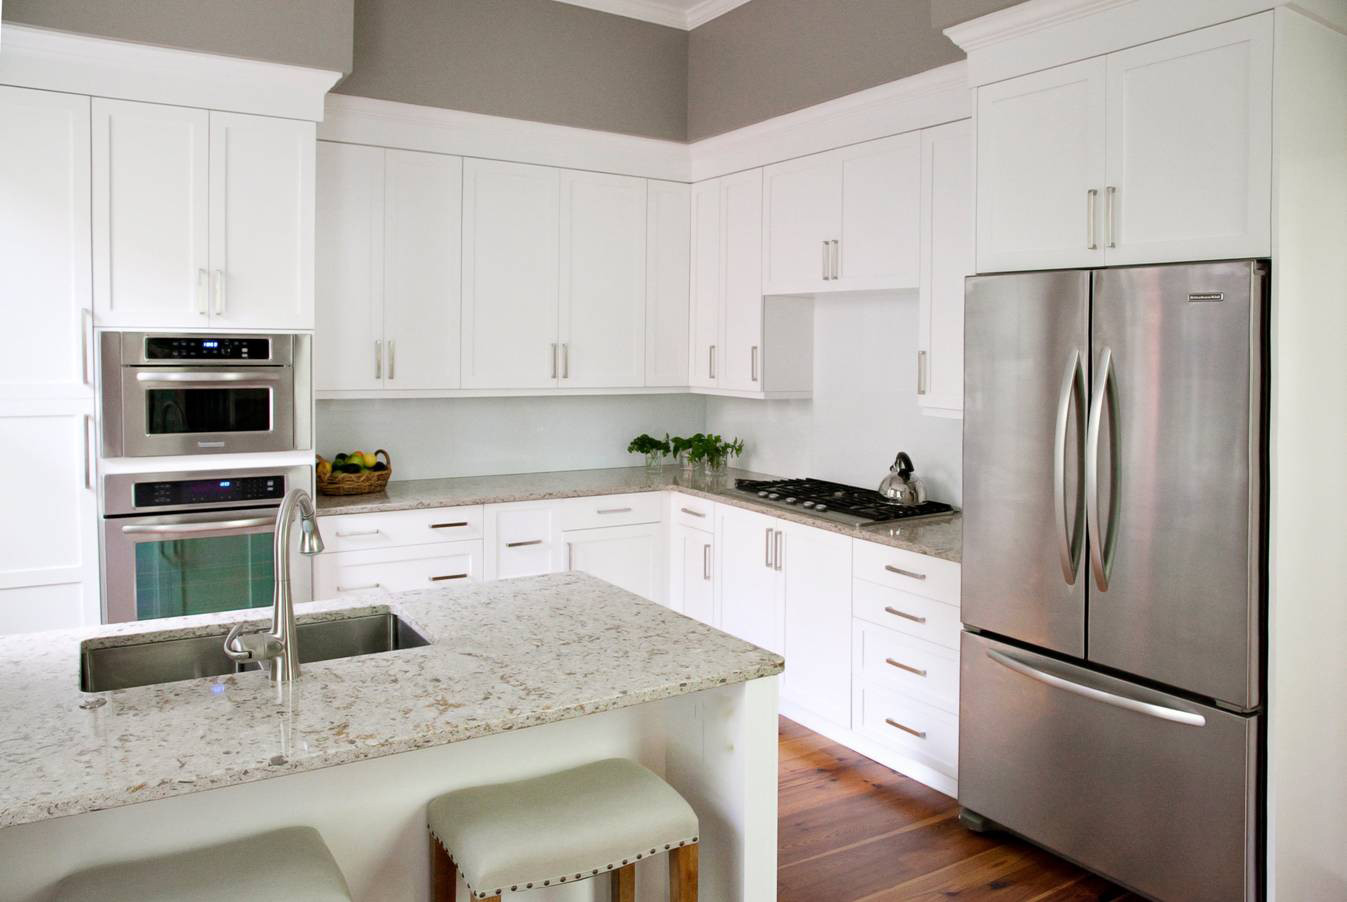 Kitchen Cabinet Paint White
 Most Popular Kitchen Cabinet Colors in 2019